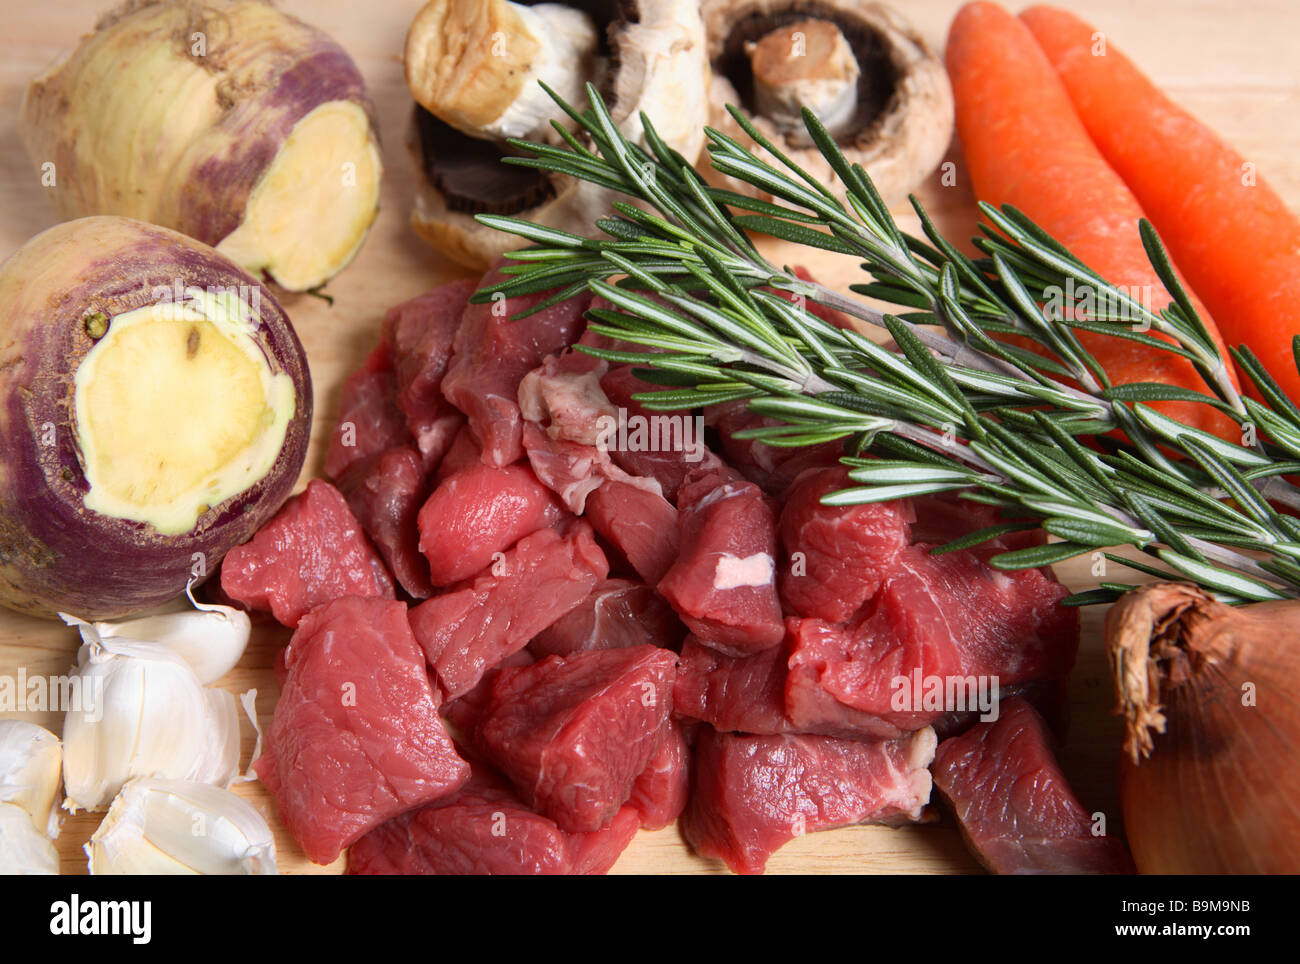 The ingredients for making a traditional British beef stew,a common home-cooked winter meal. Stock Photo